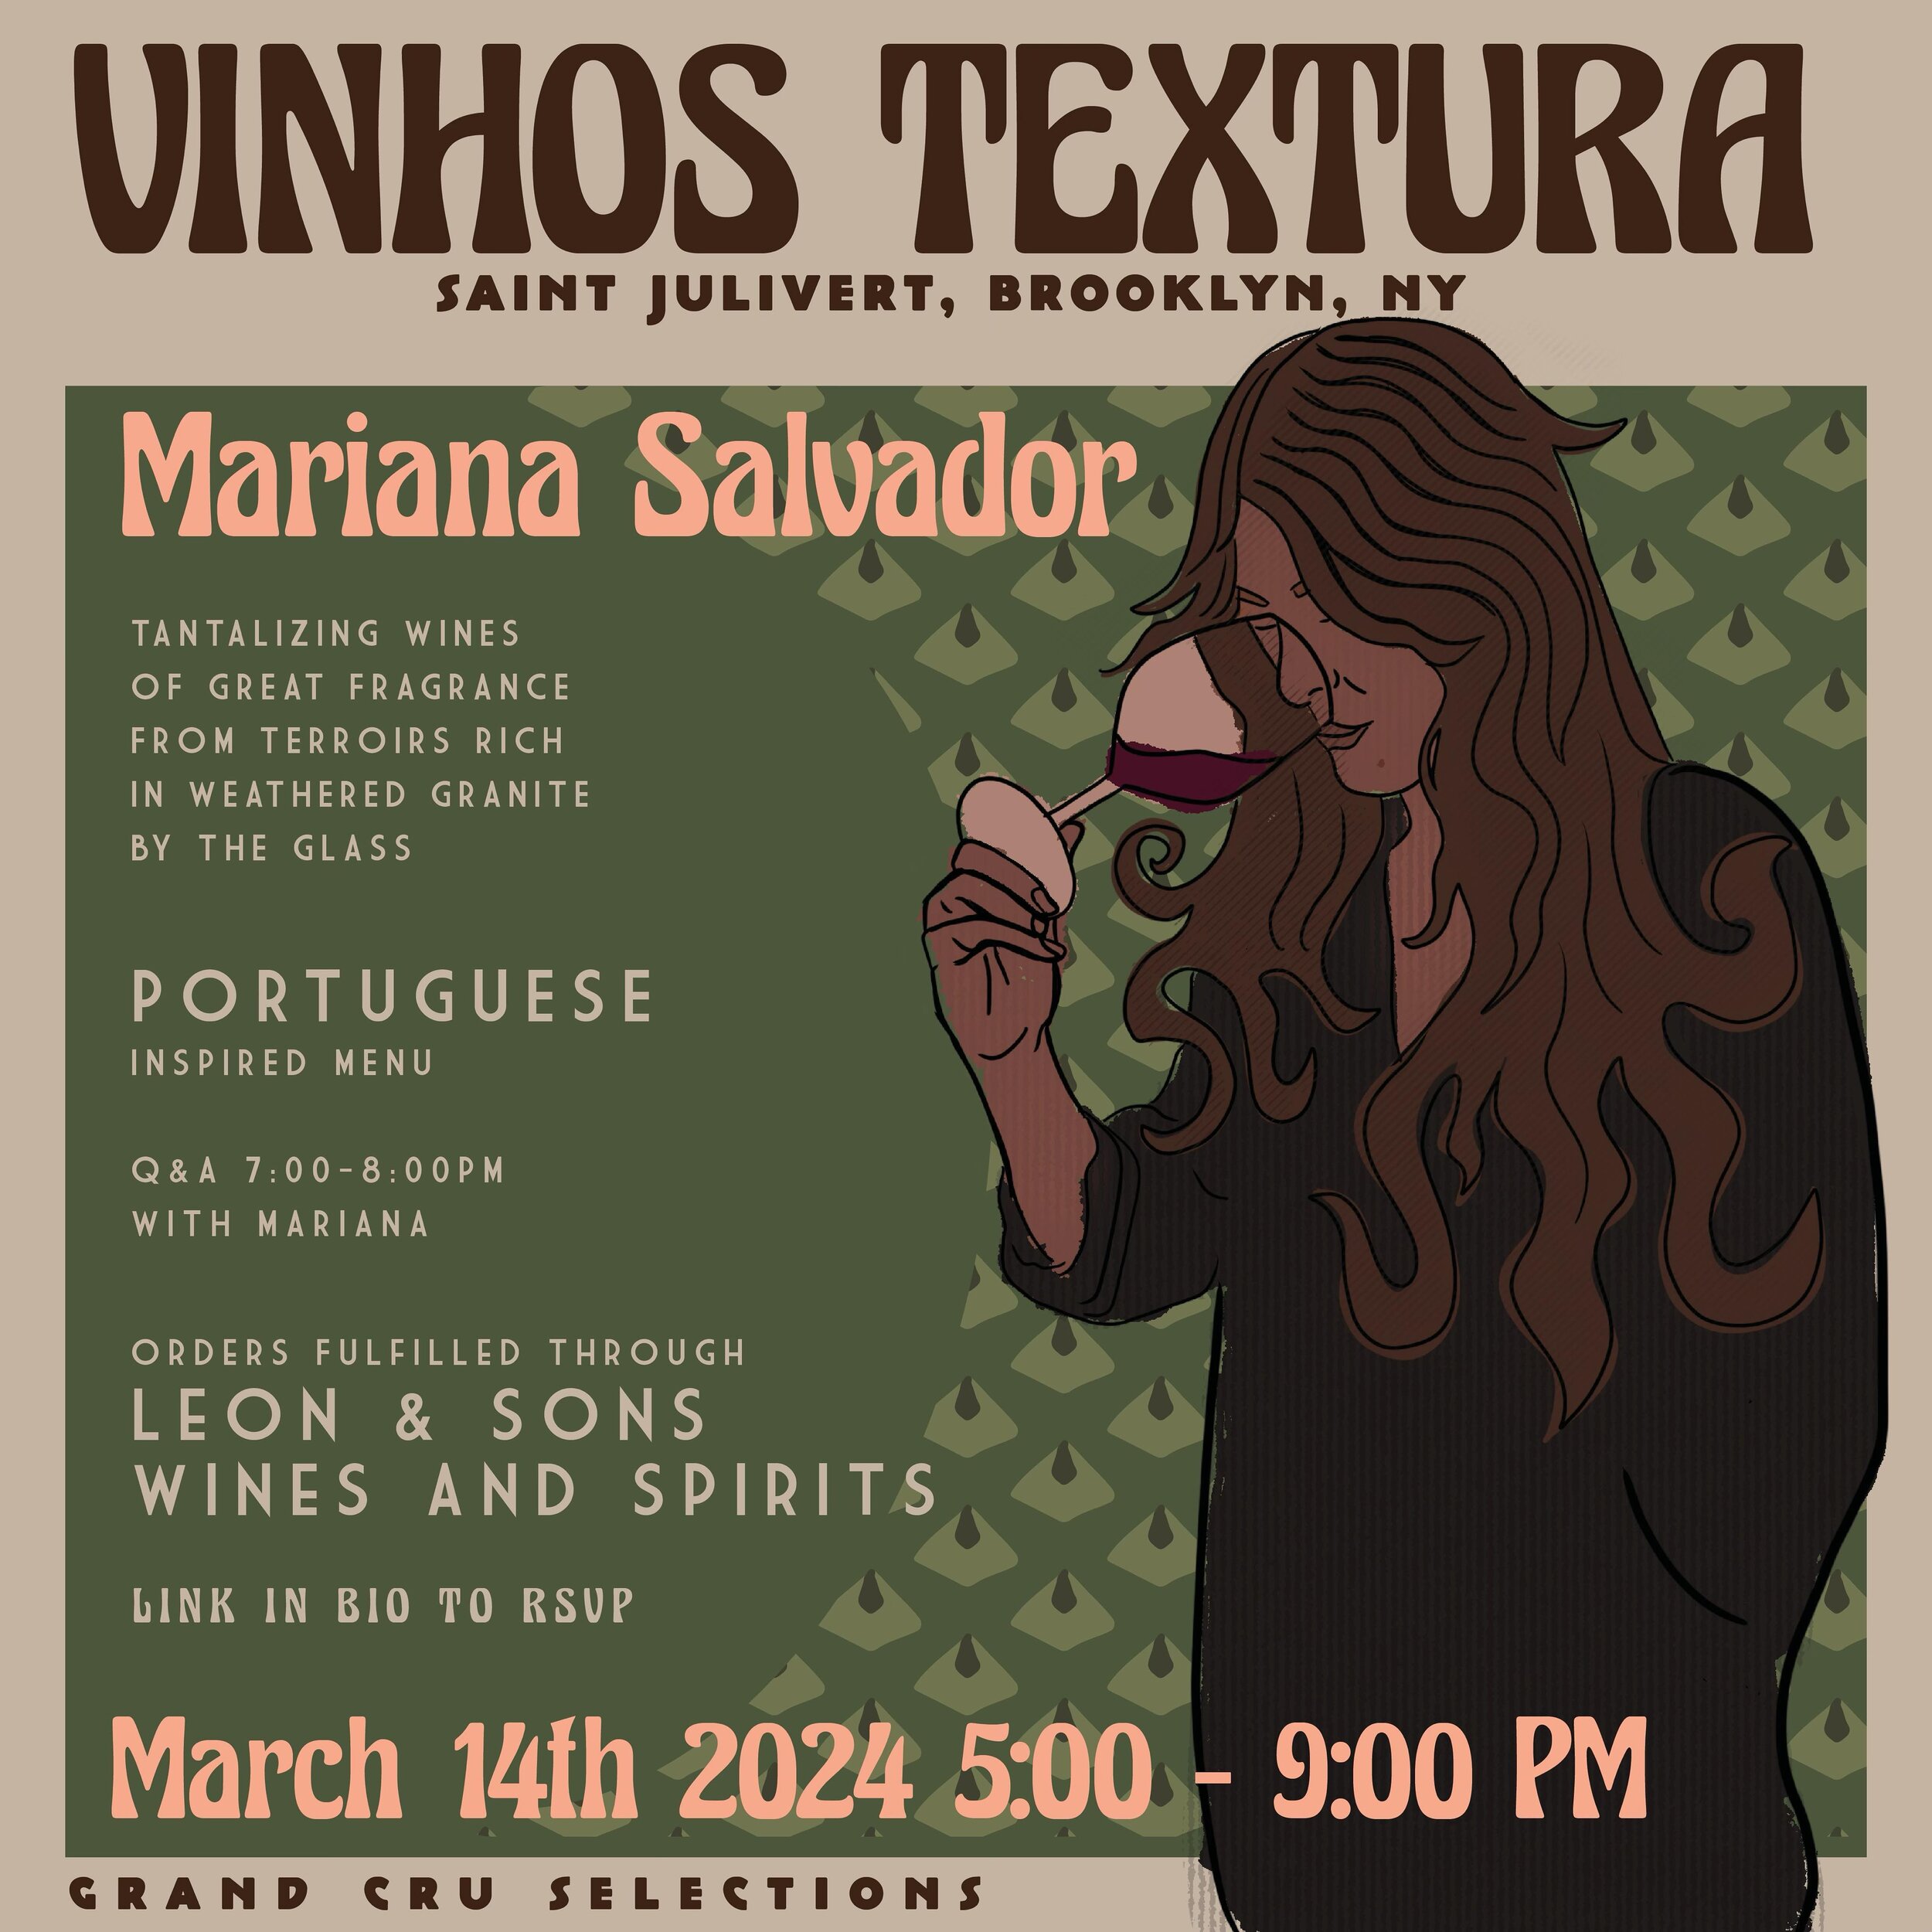 Winemaker Mariana Salvador will be at Saint Julivert all night March 14th to discuss the story and wines of Vinhos Textura! Textura wines offered by the glass all night long, with a Portuguese-inspired, one day only menu. 
Link in bio to reserve a se